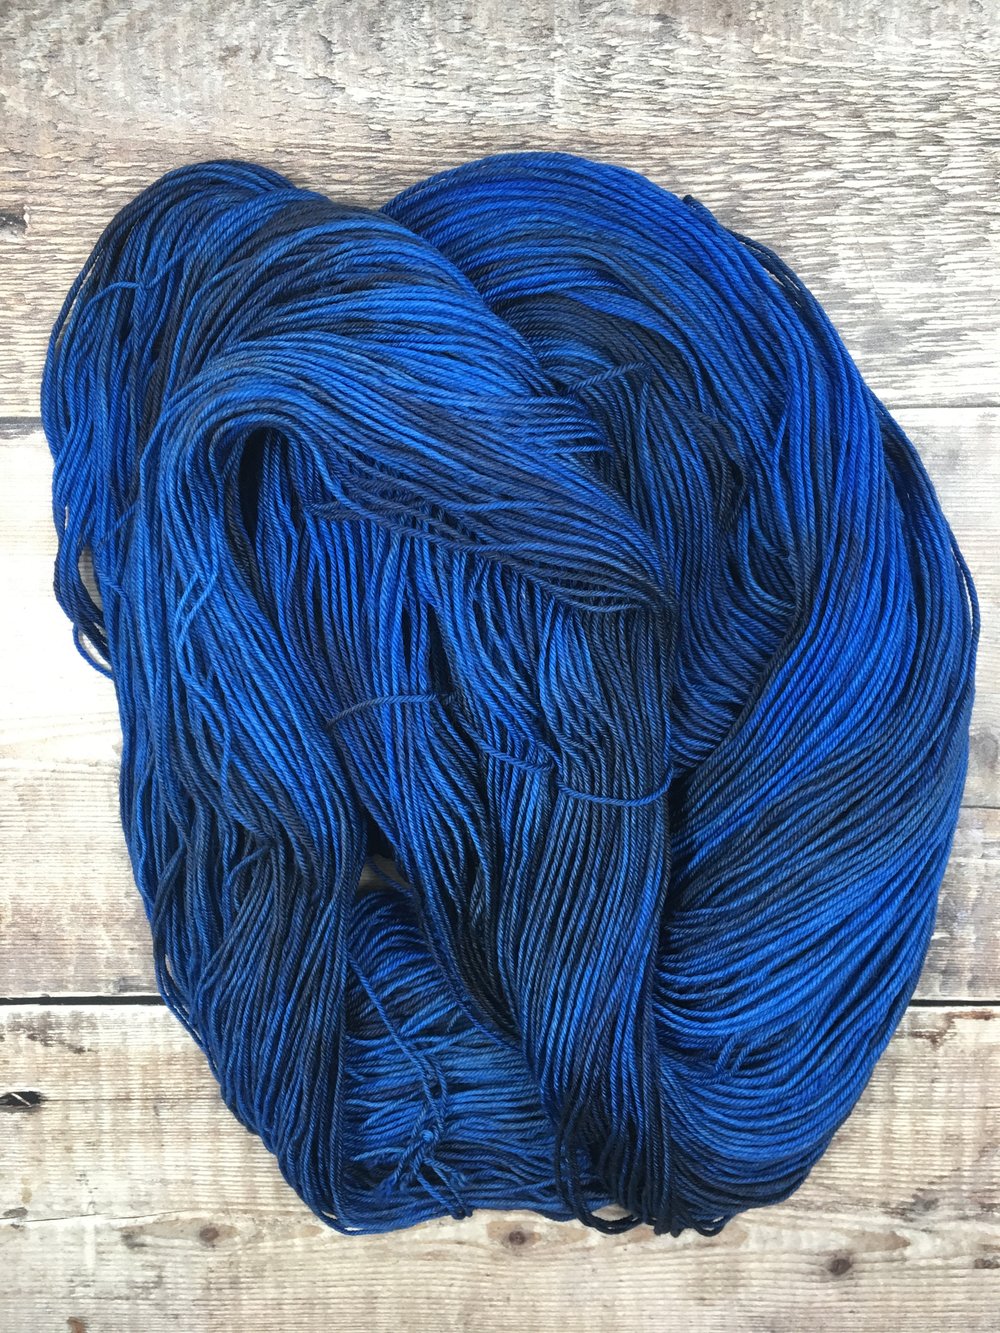 Wild Atlantic Yarns weekend clearance sale – Polly Knitter